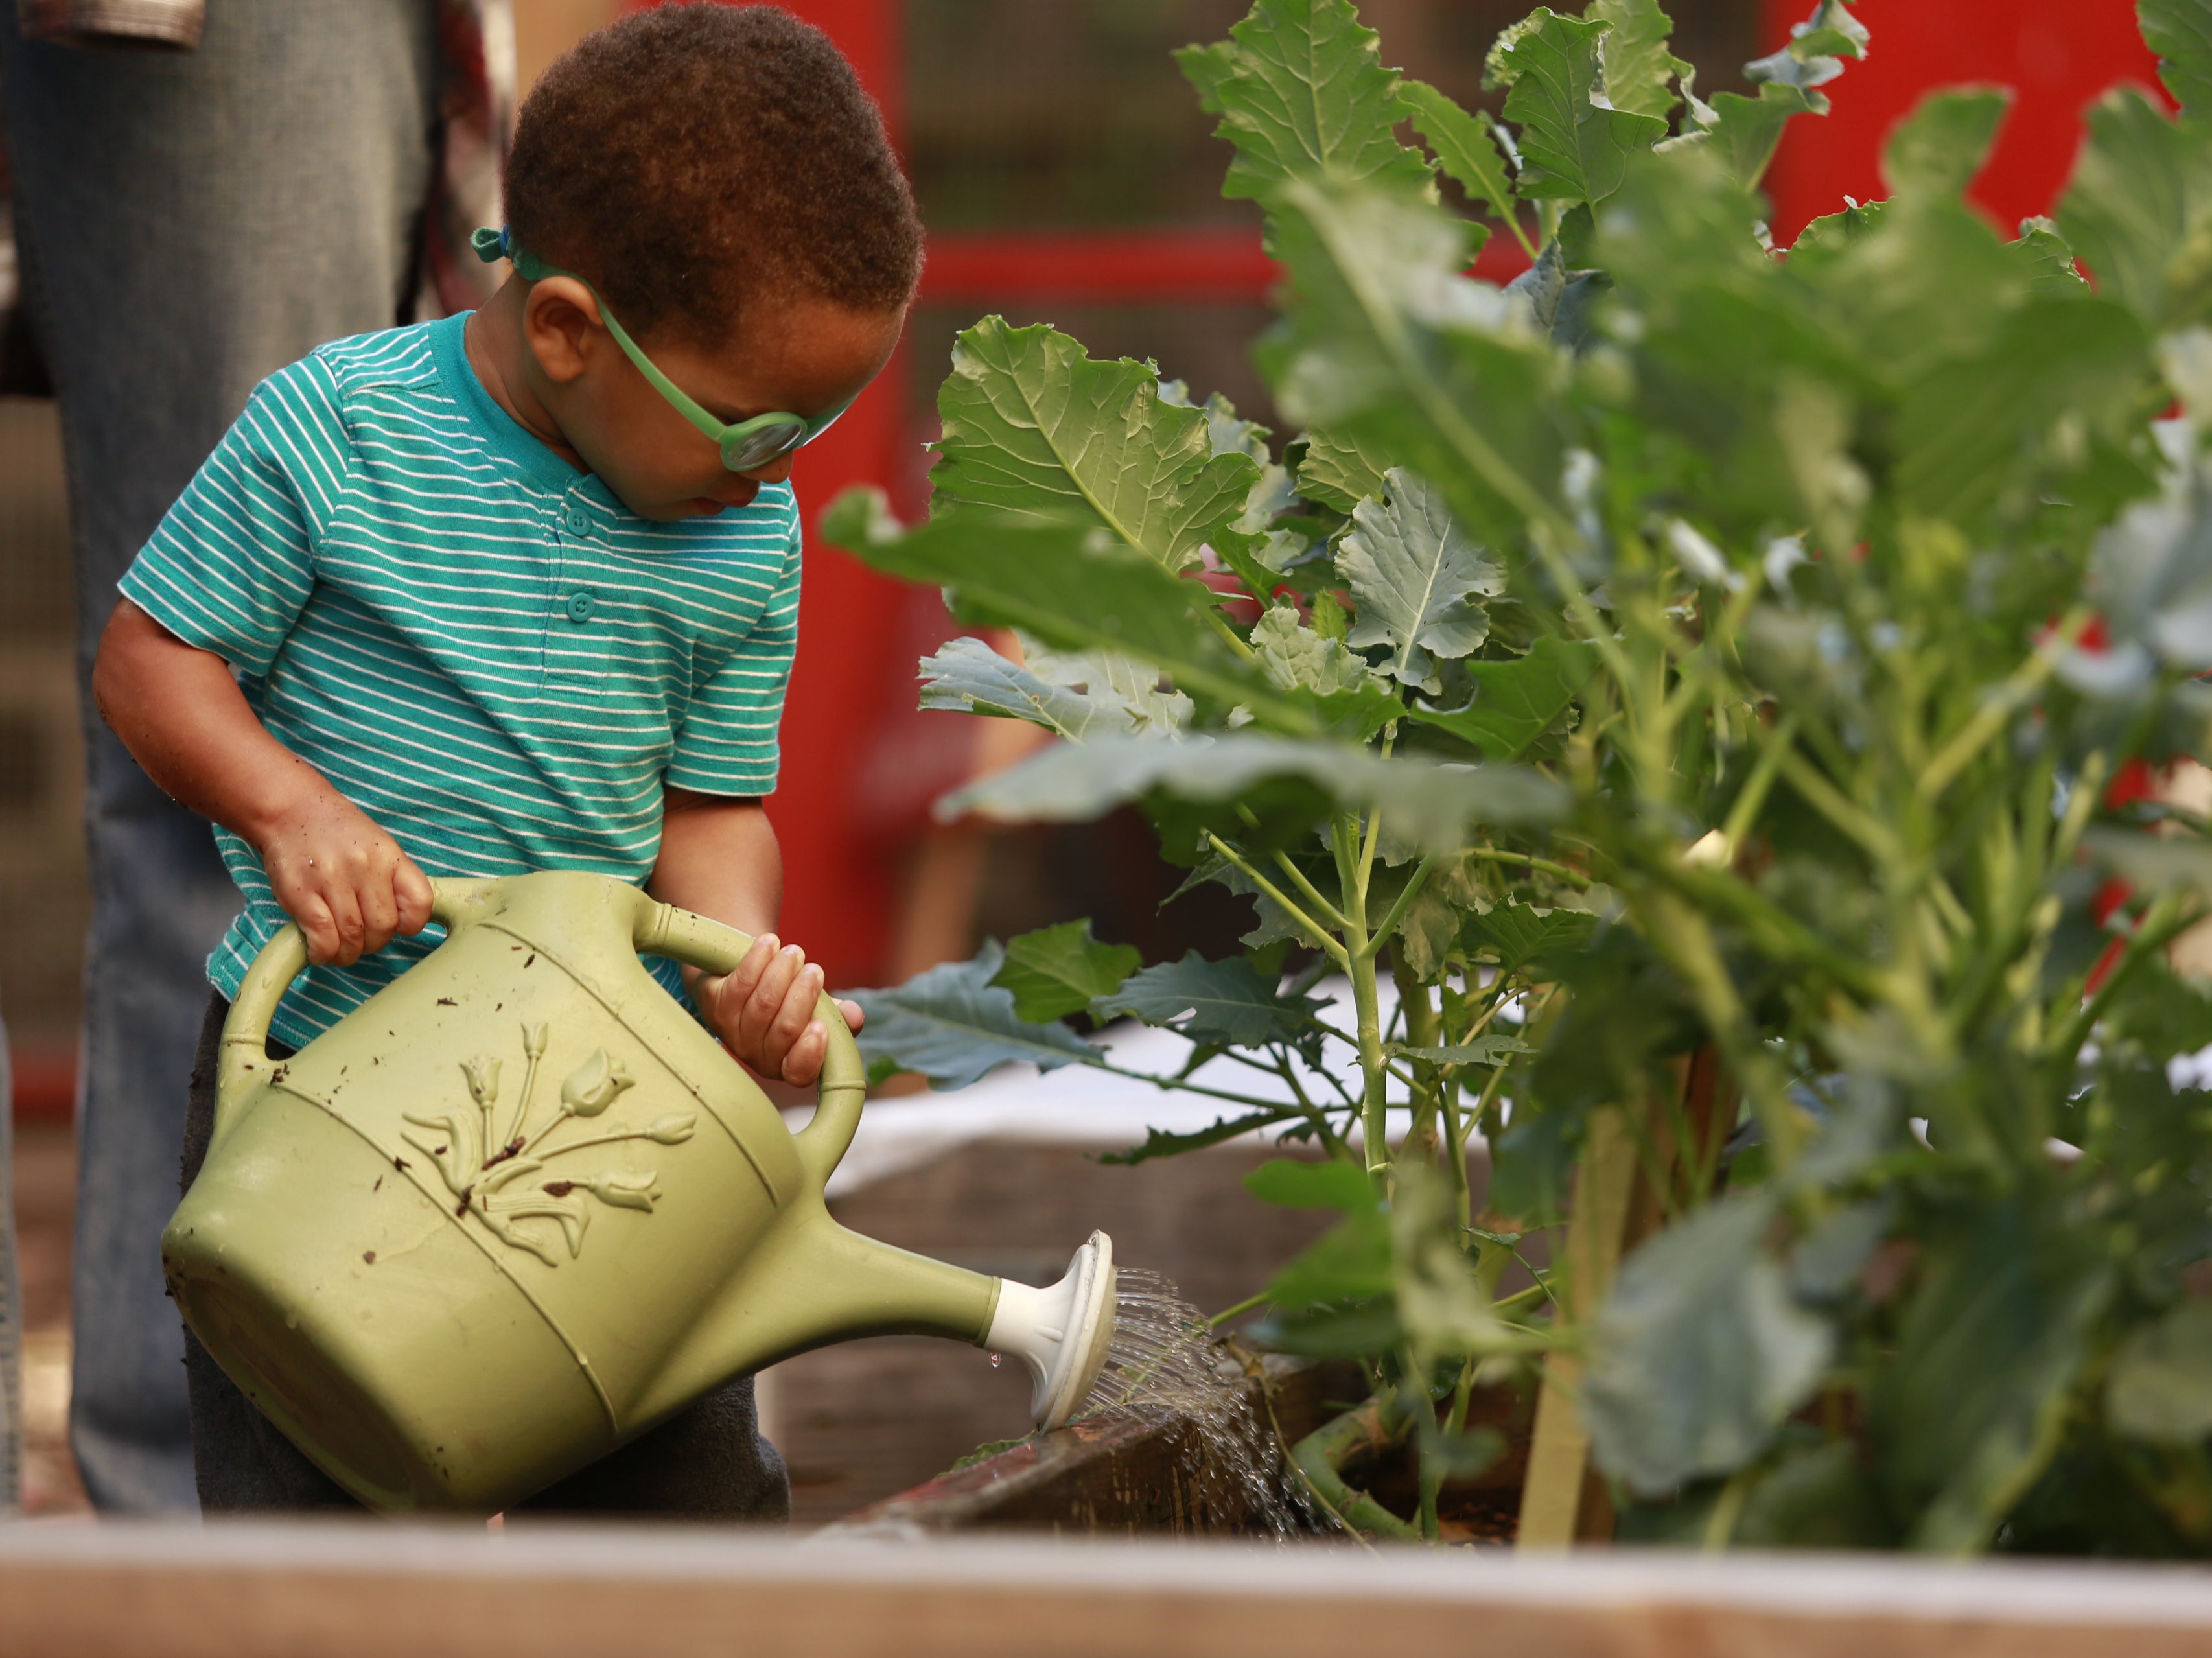 An elementary school student uses a watering can at one of Harlem Grown’s urban farms in New York City